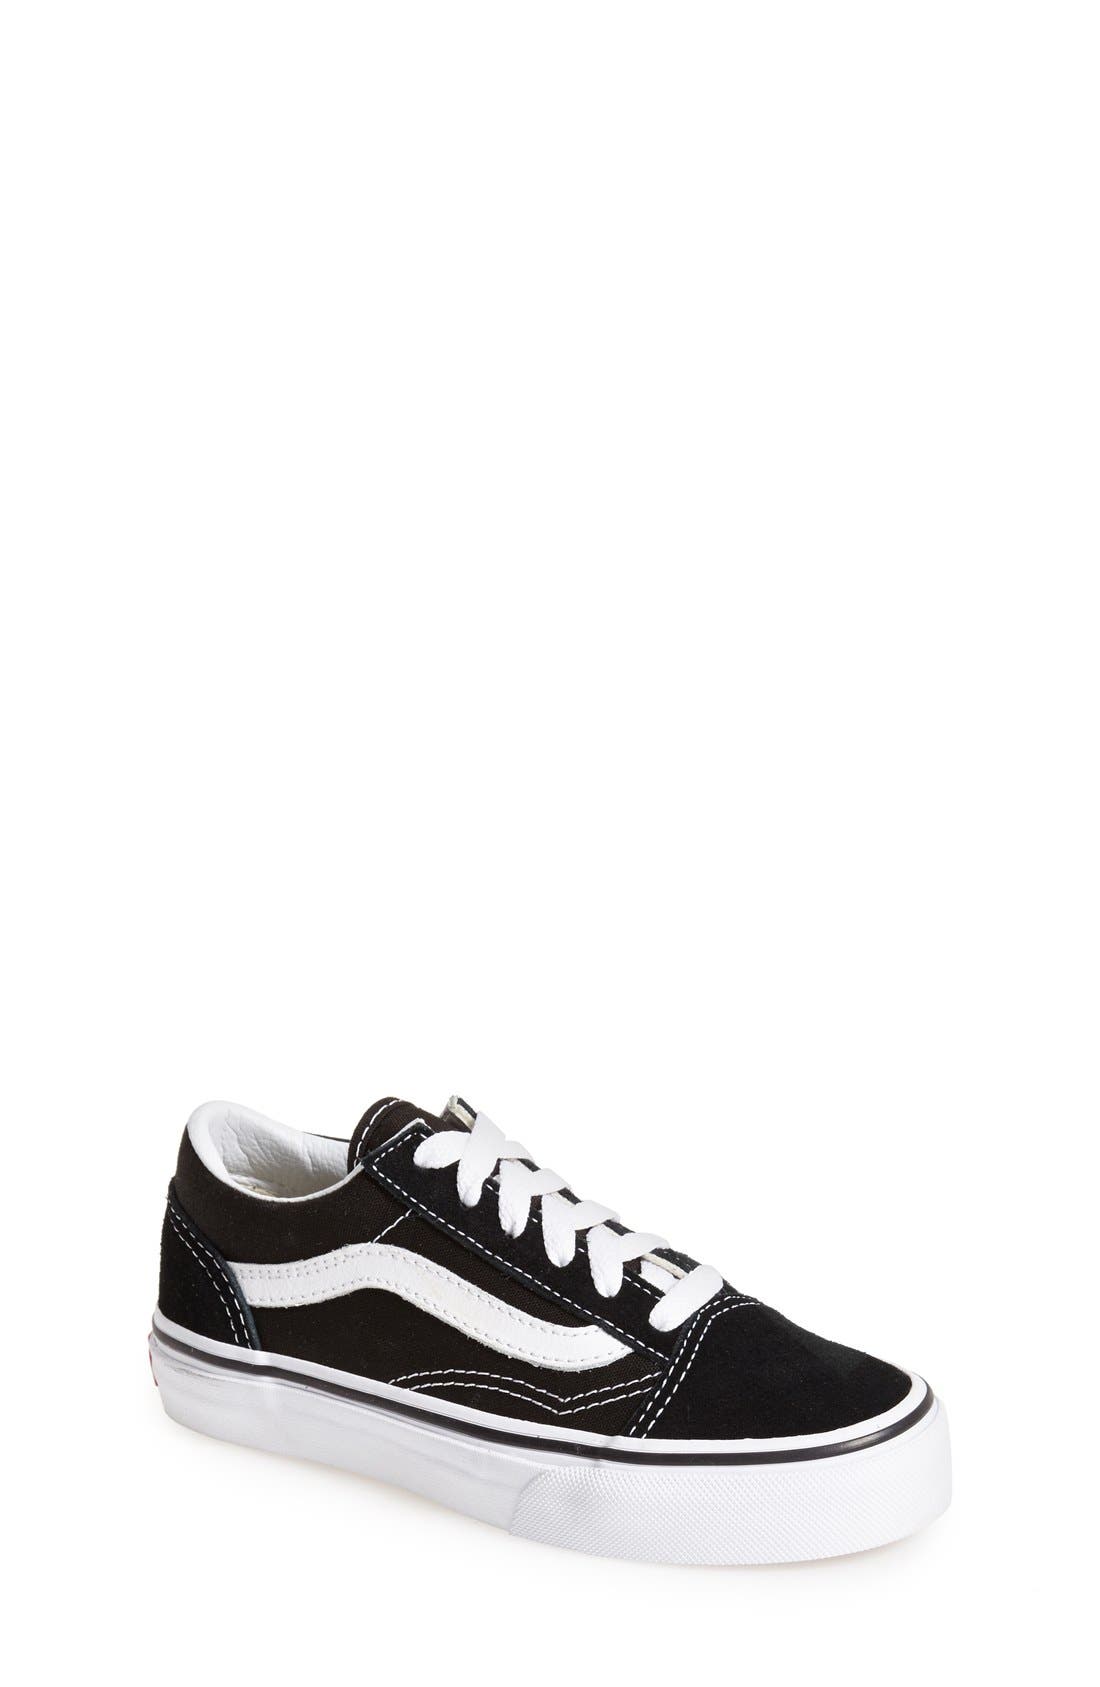 how much do old skool vans cost